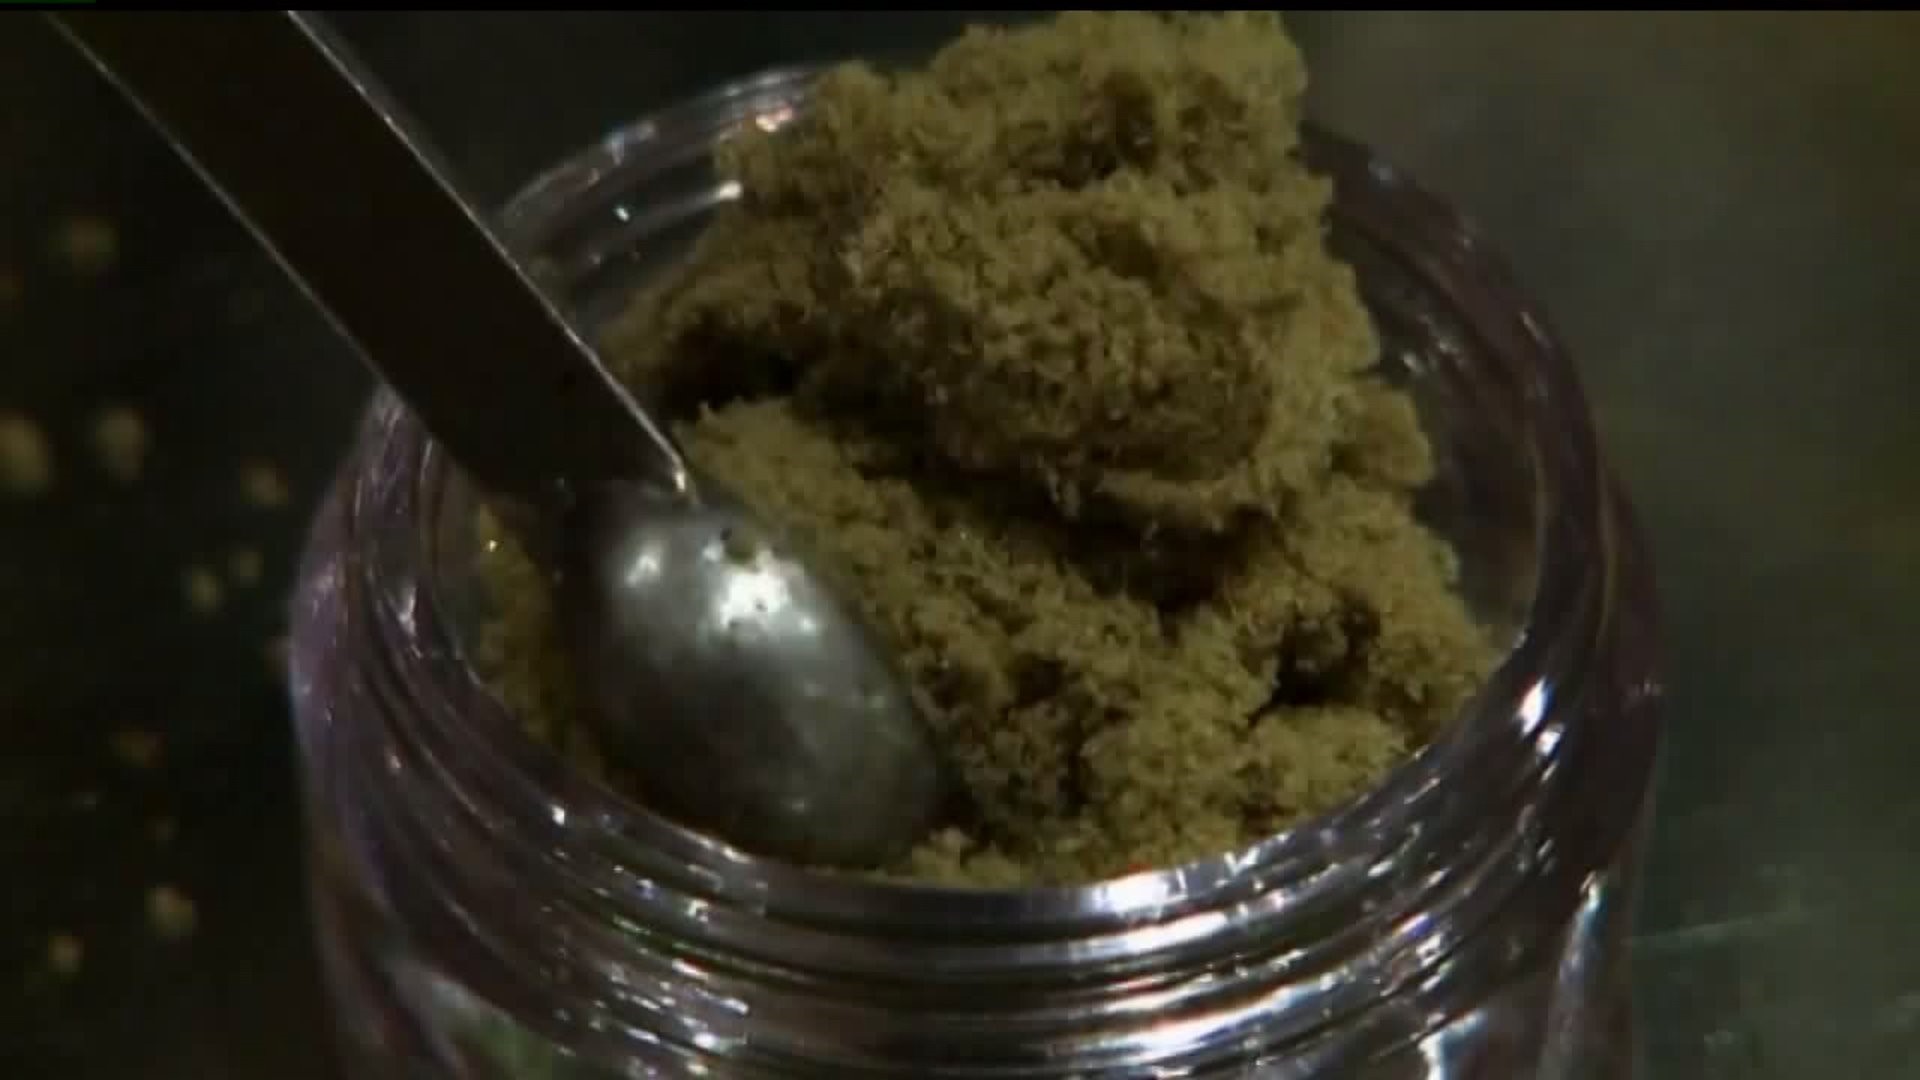 Dry-leaf medical marijuana available for patients in Pa. tomorrow